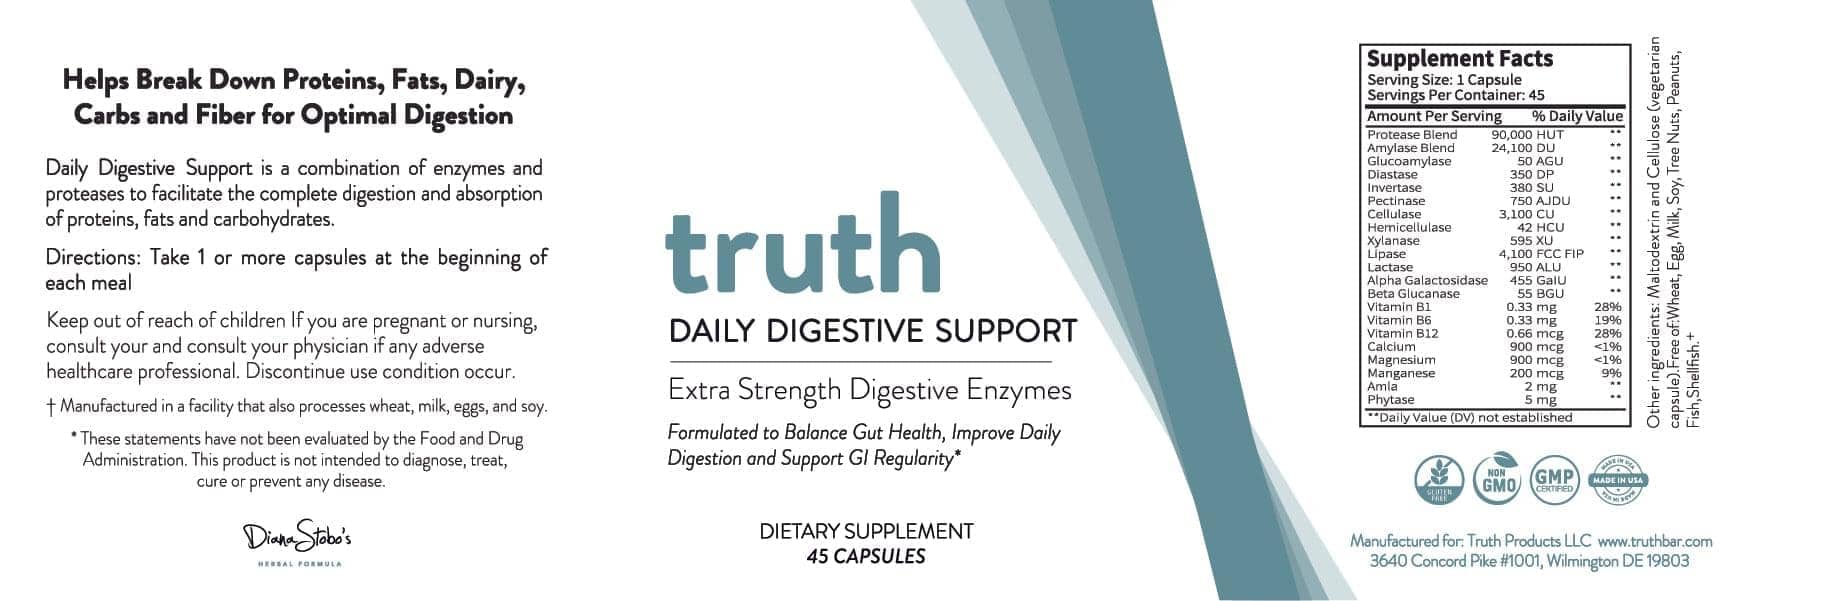 Daily Digestive Support